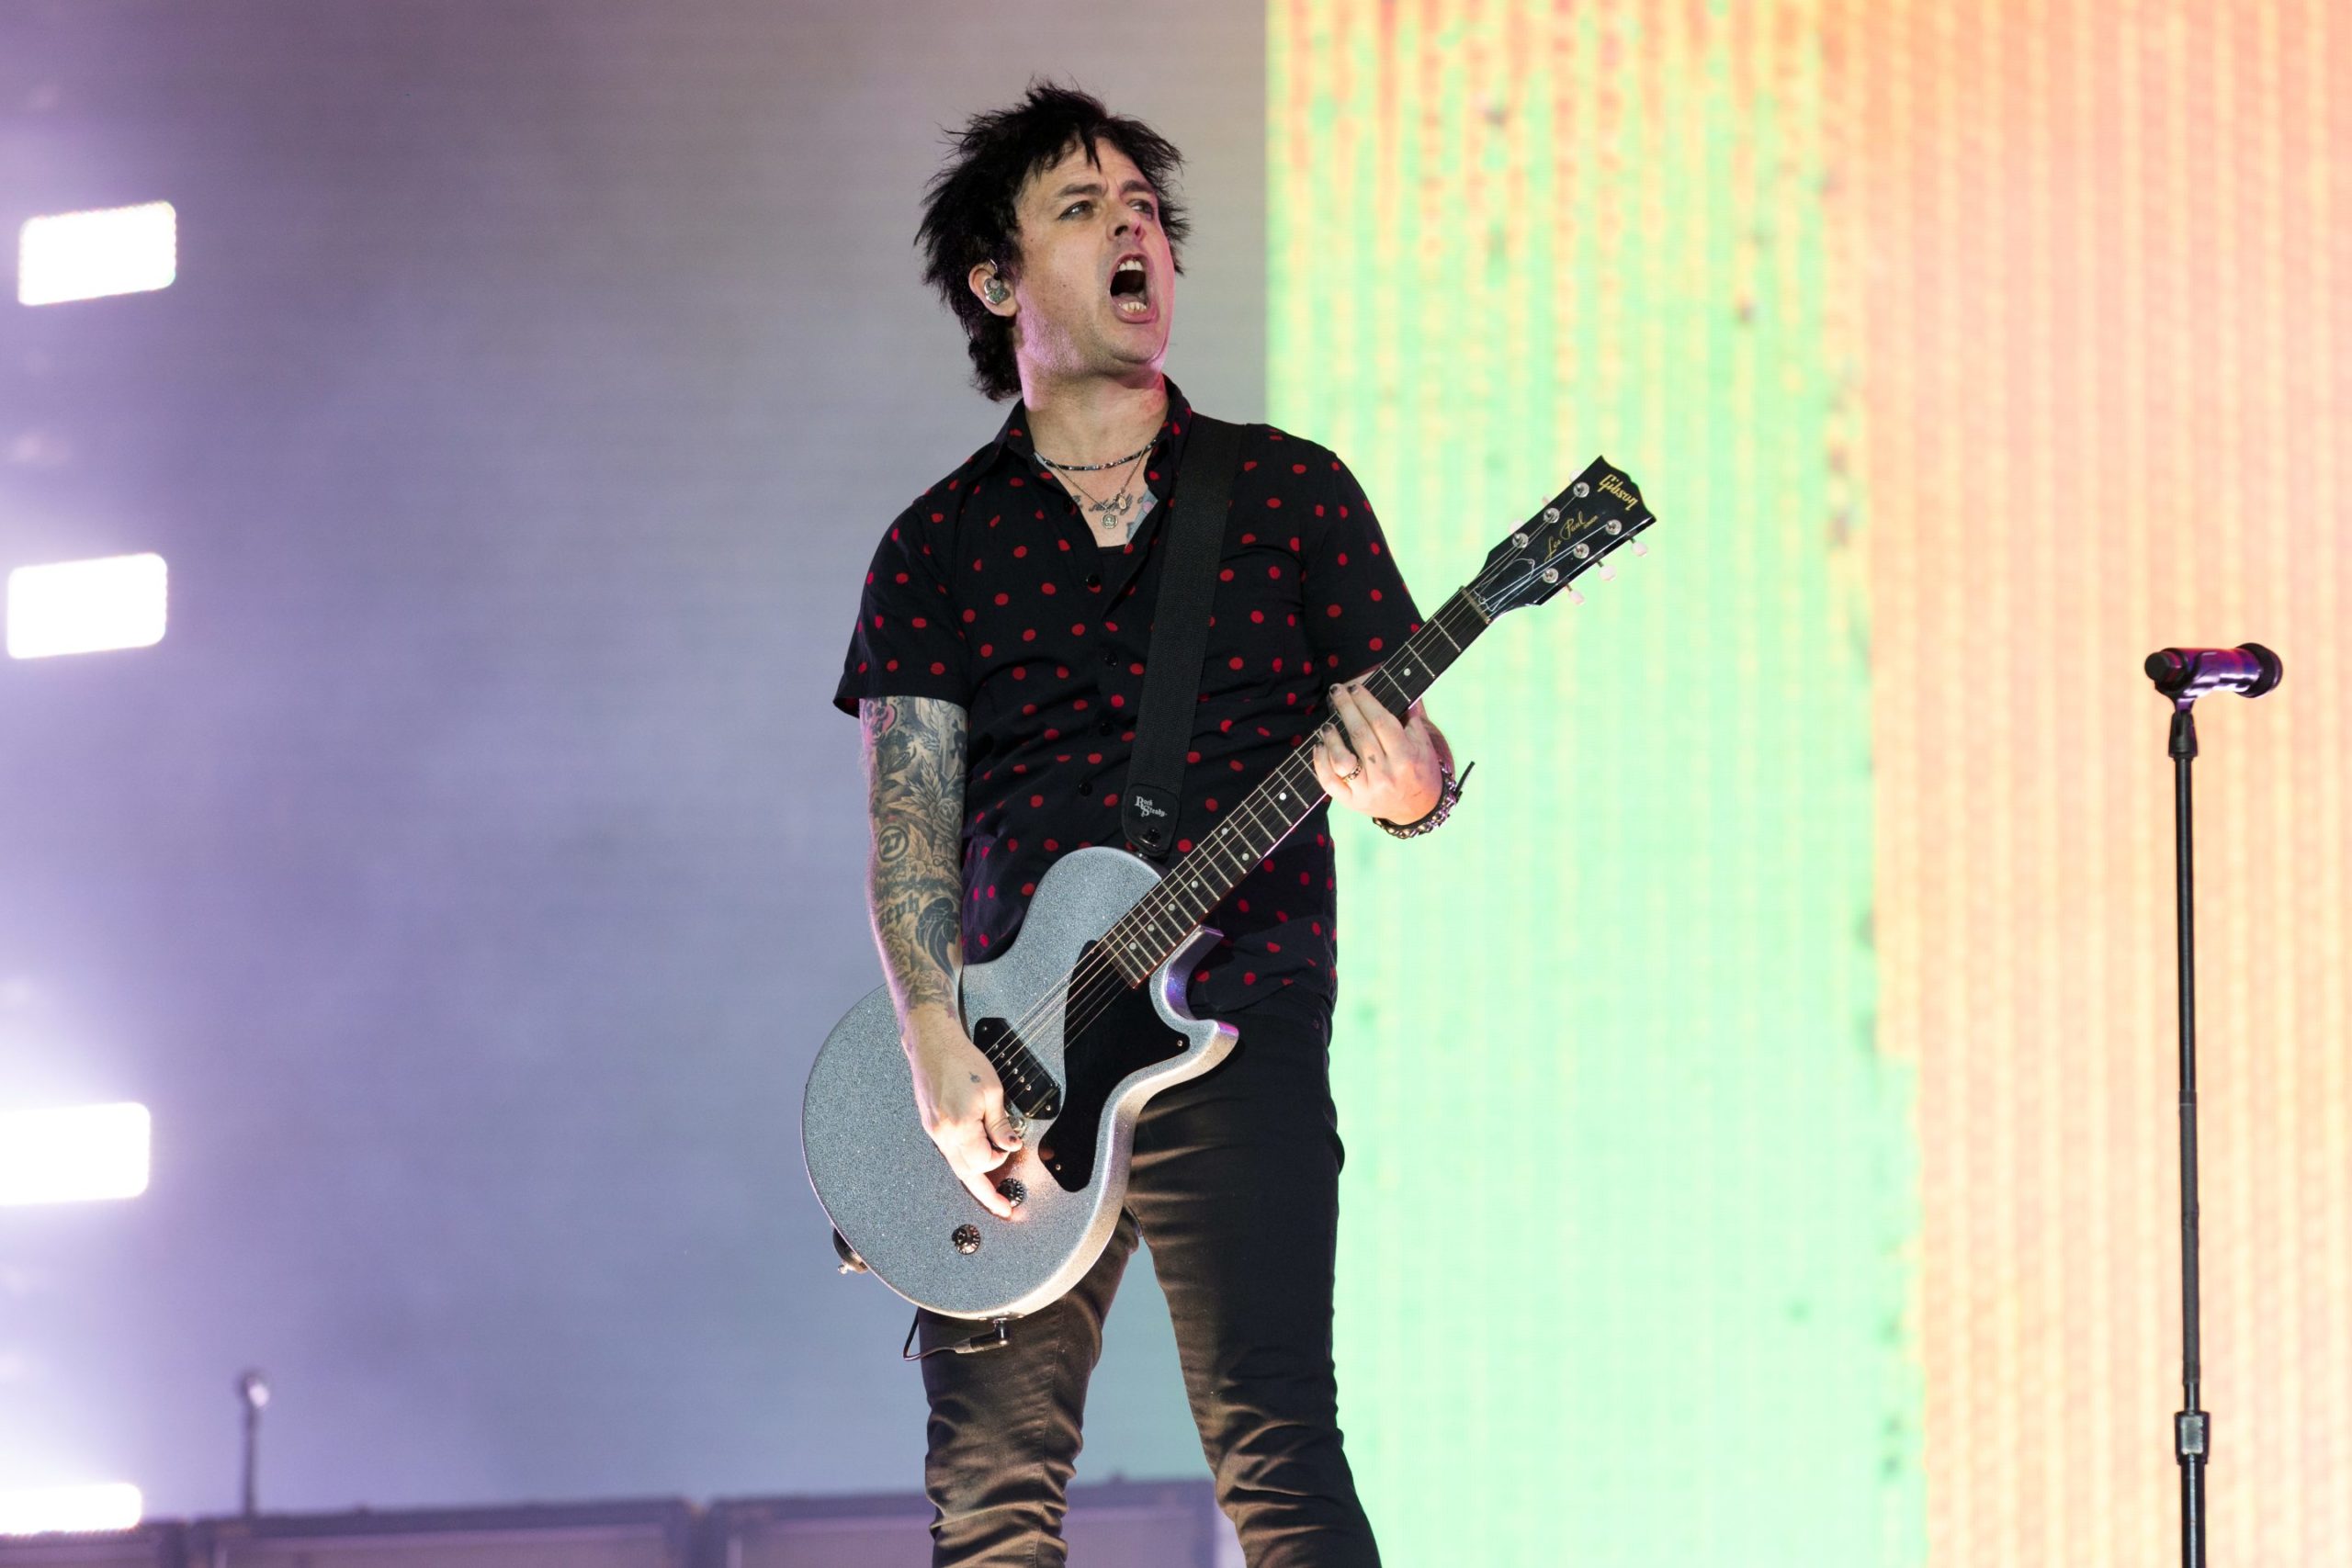 Green Day frontman says he will renounce his U.S. citizenship now that Roe v. Wade is overturned